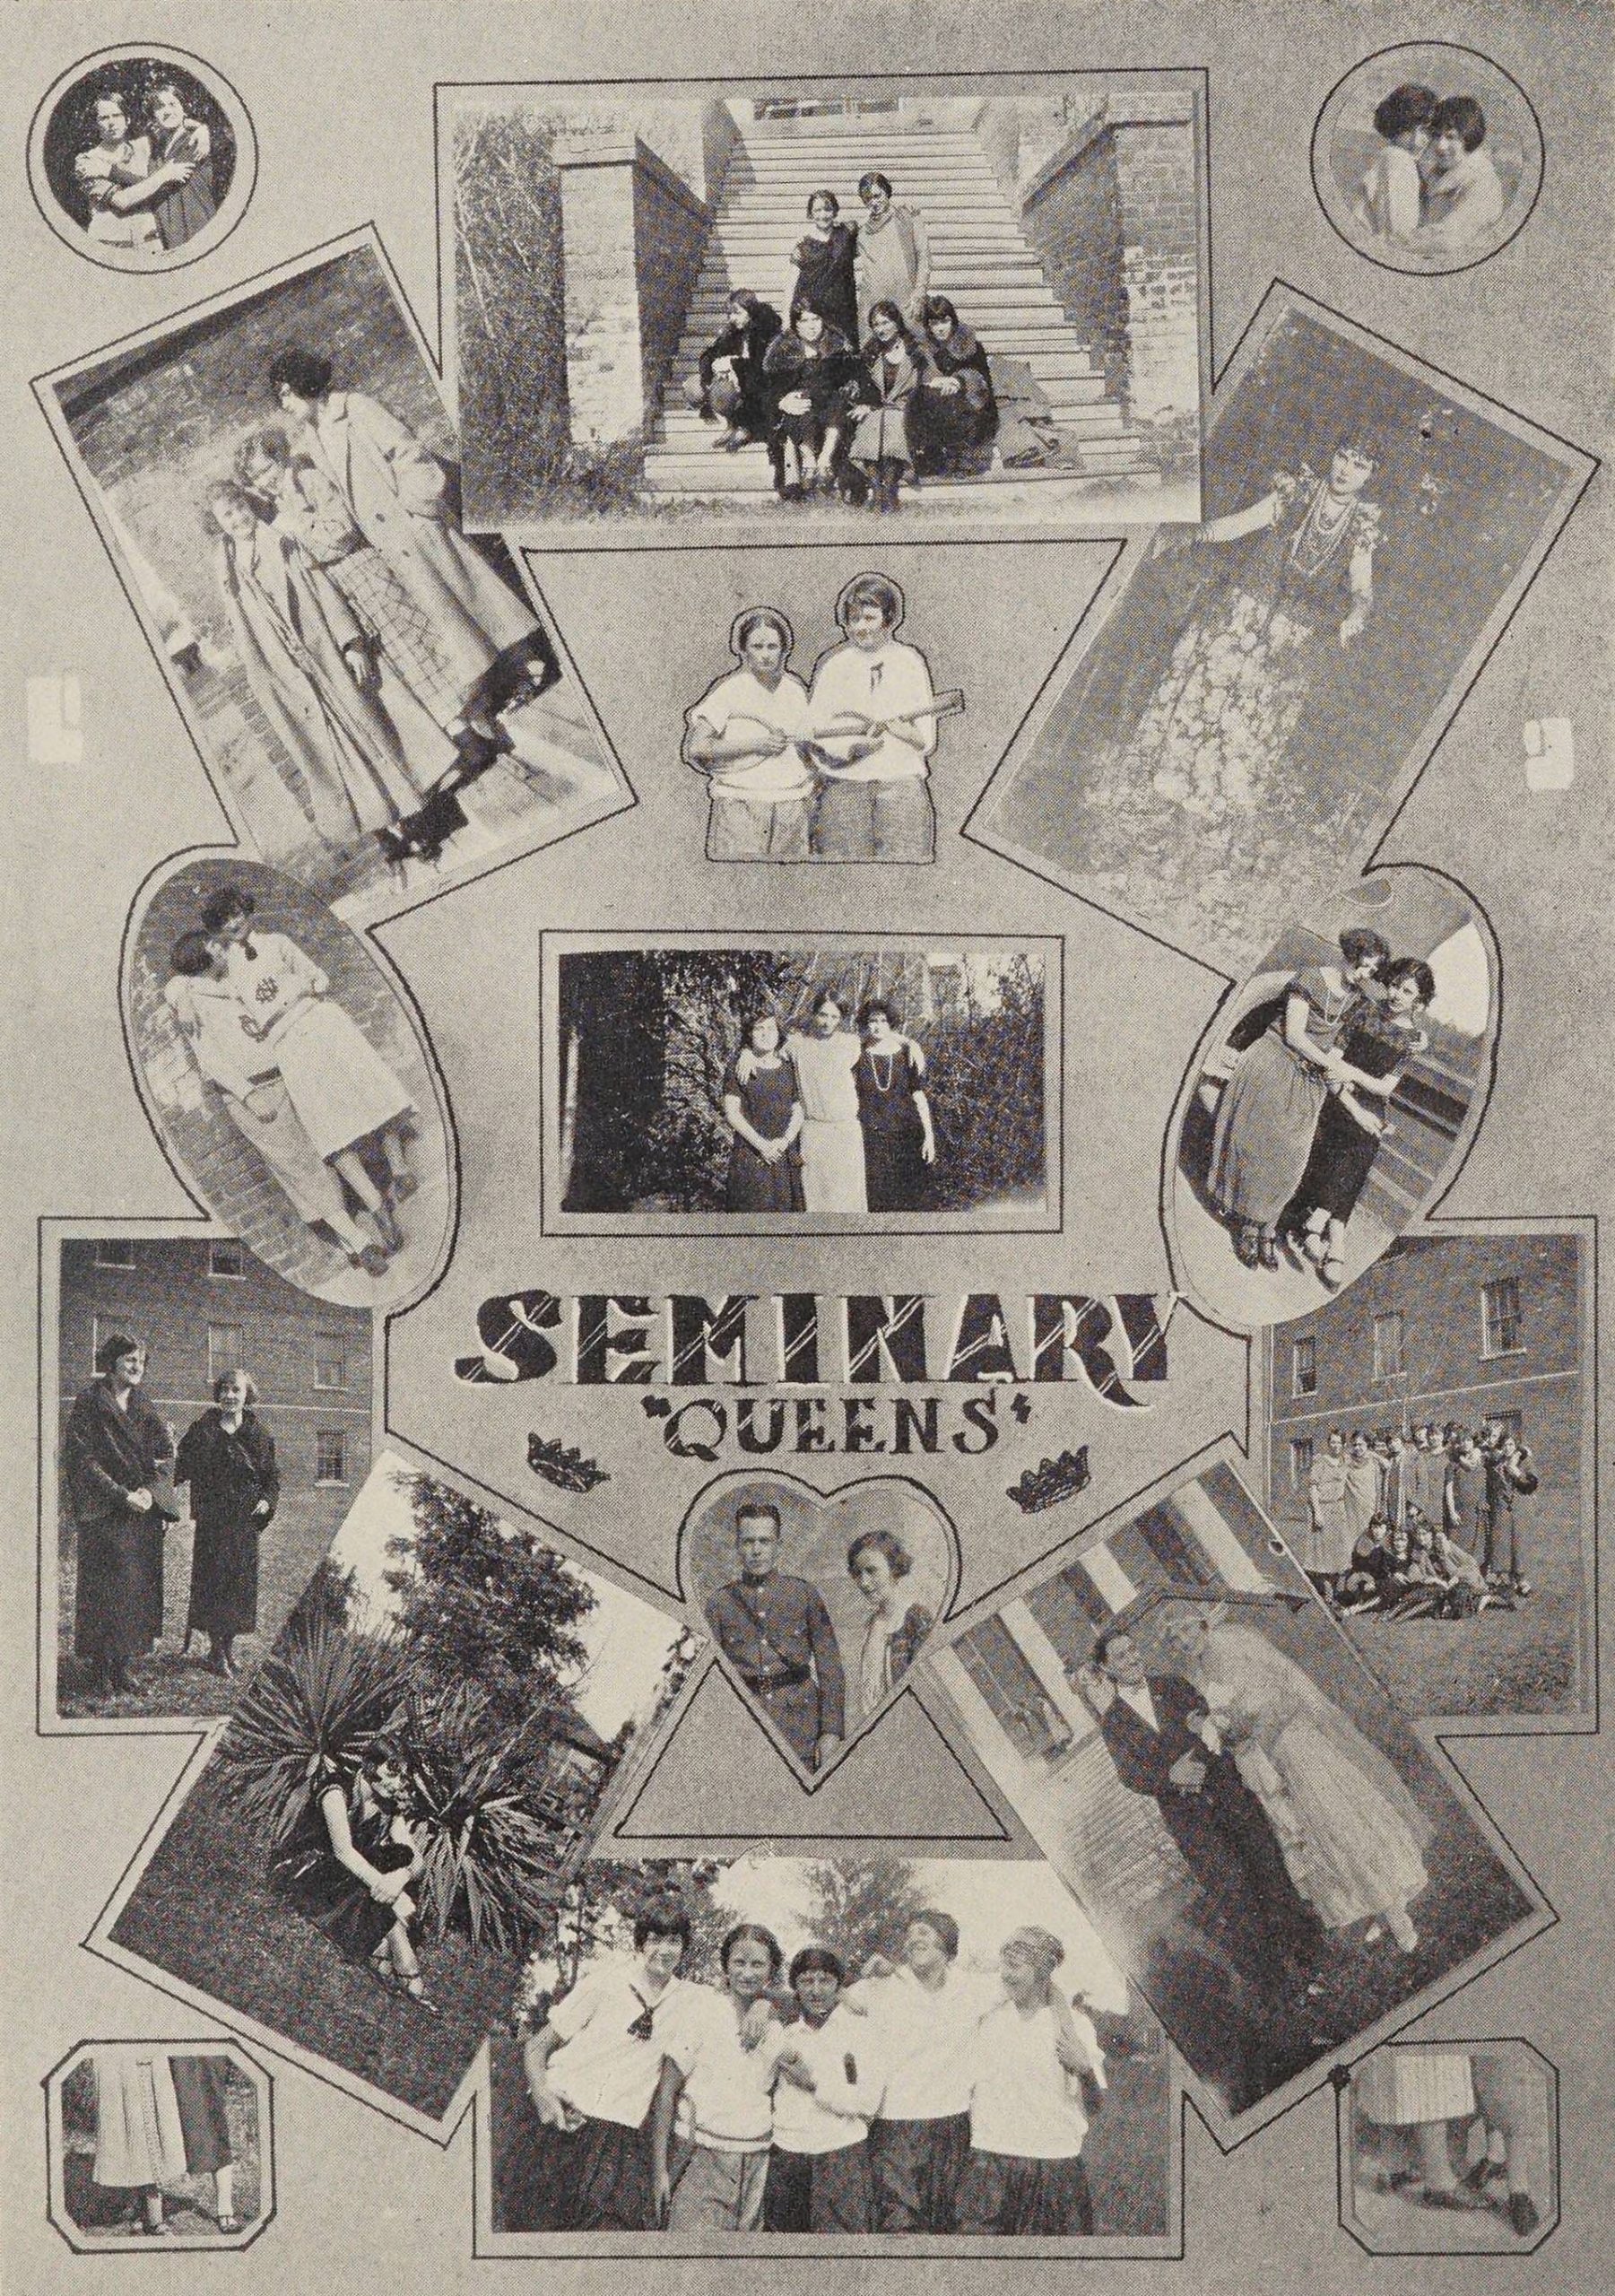 A collage of seminary queens from Mount Pleasant Collegiate Institute in 1925. Some people are pictured in wedding dresses, next to partners, friends, and in fashionable clothing.